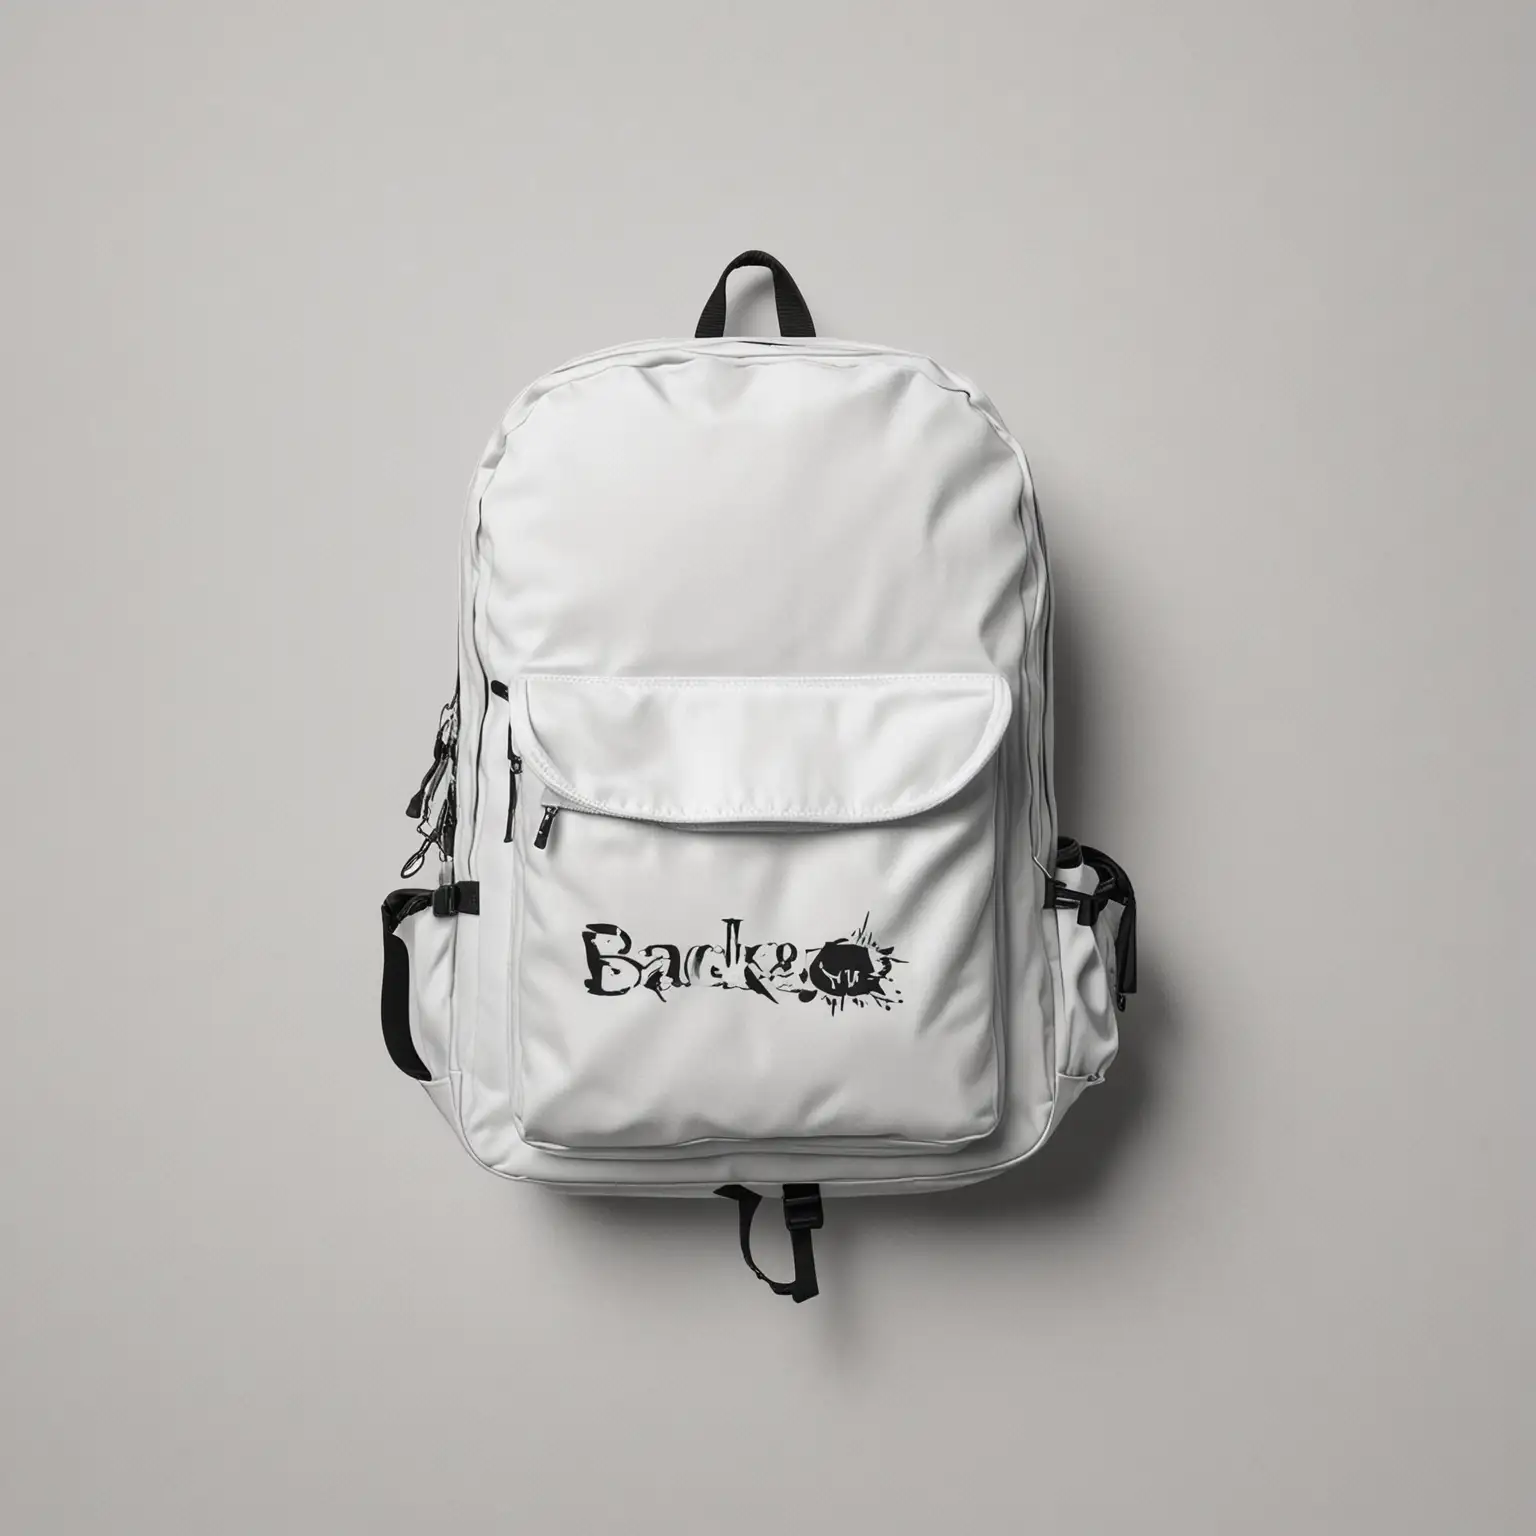 Logo: backpack attached to the word backpack
Background: white